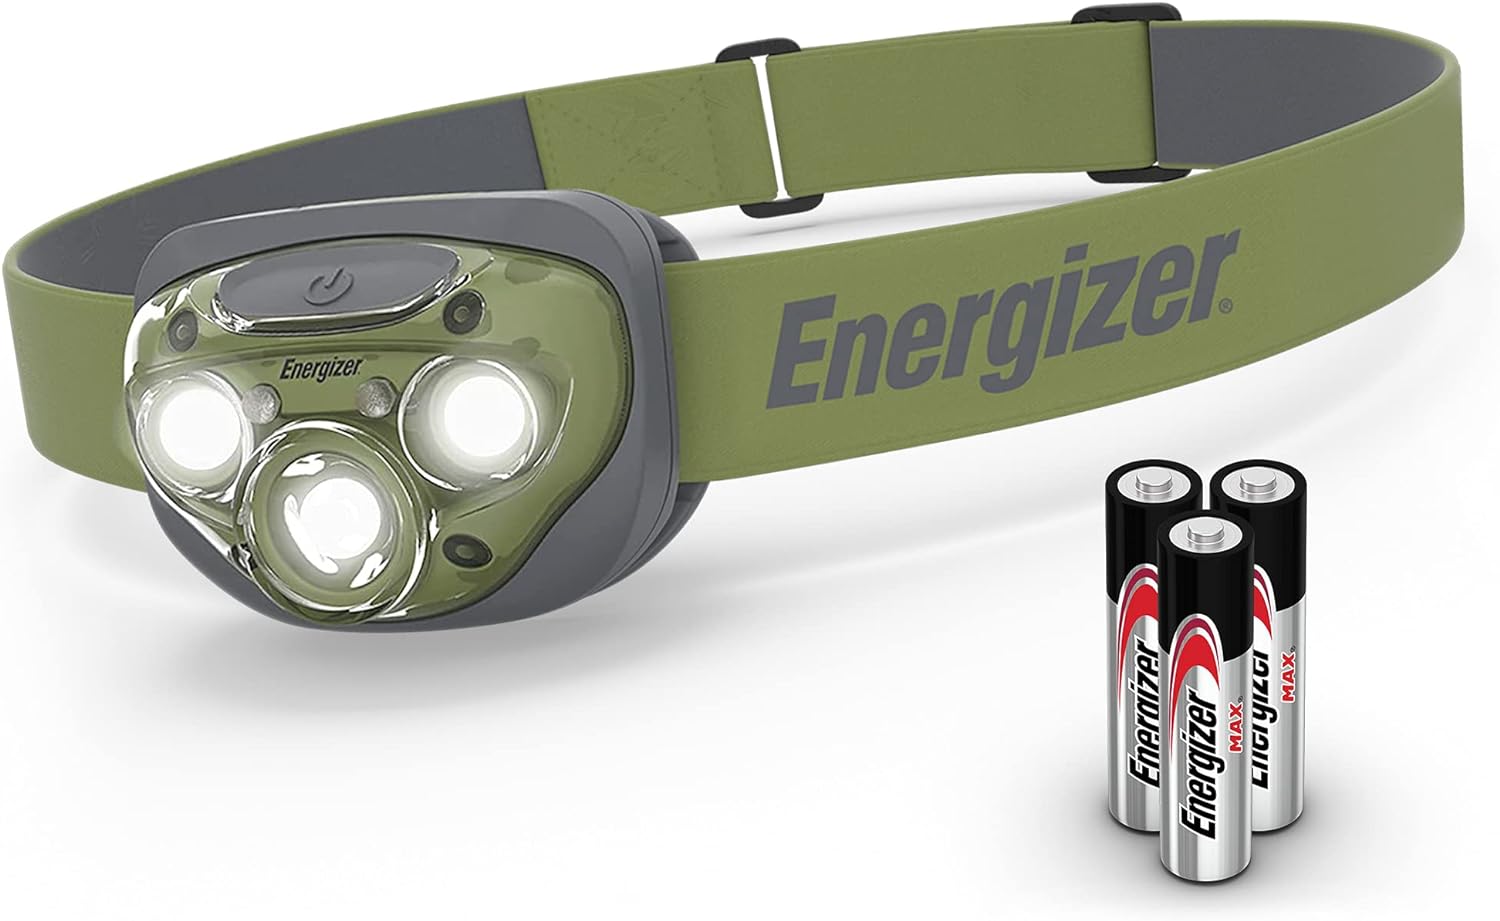 ENERGIZER LED Headlamp Pro260, Rugged IPX4 Water Resistant Head Light, Ultra Bright Headlamps for Running, Camping, Outdoor, St